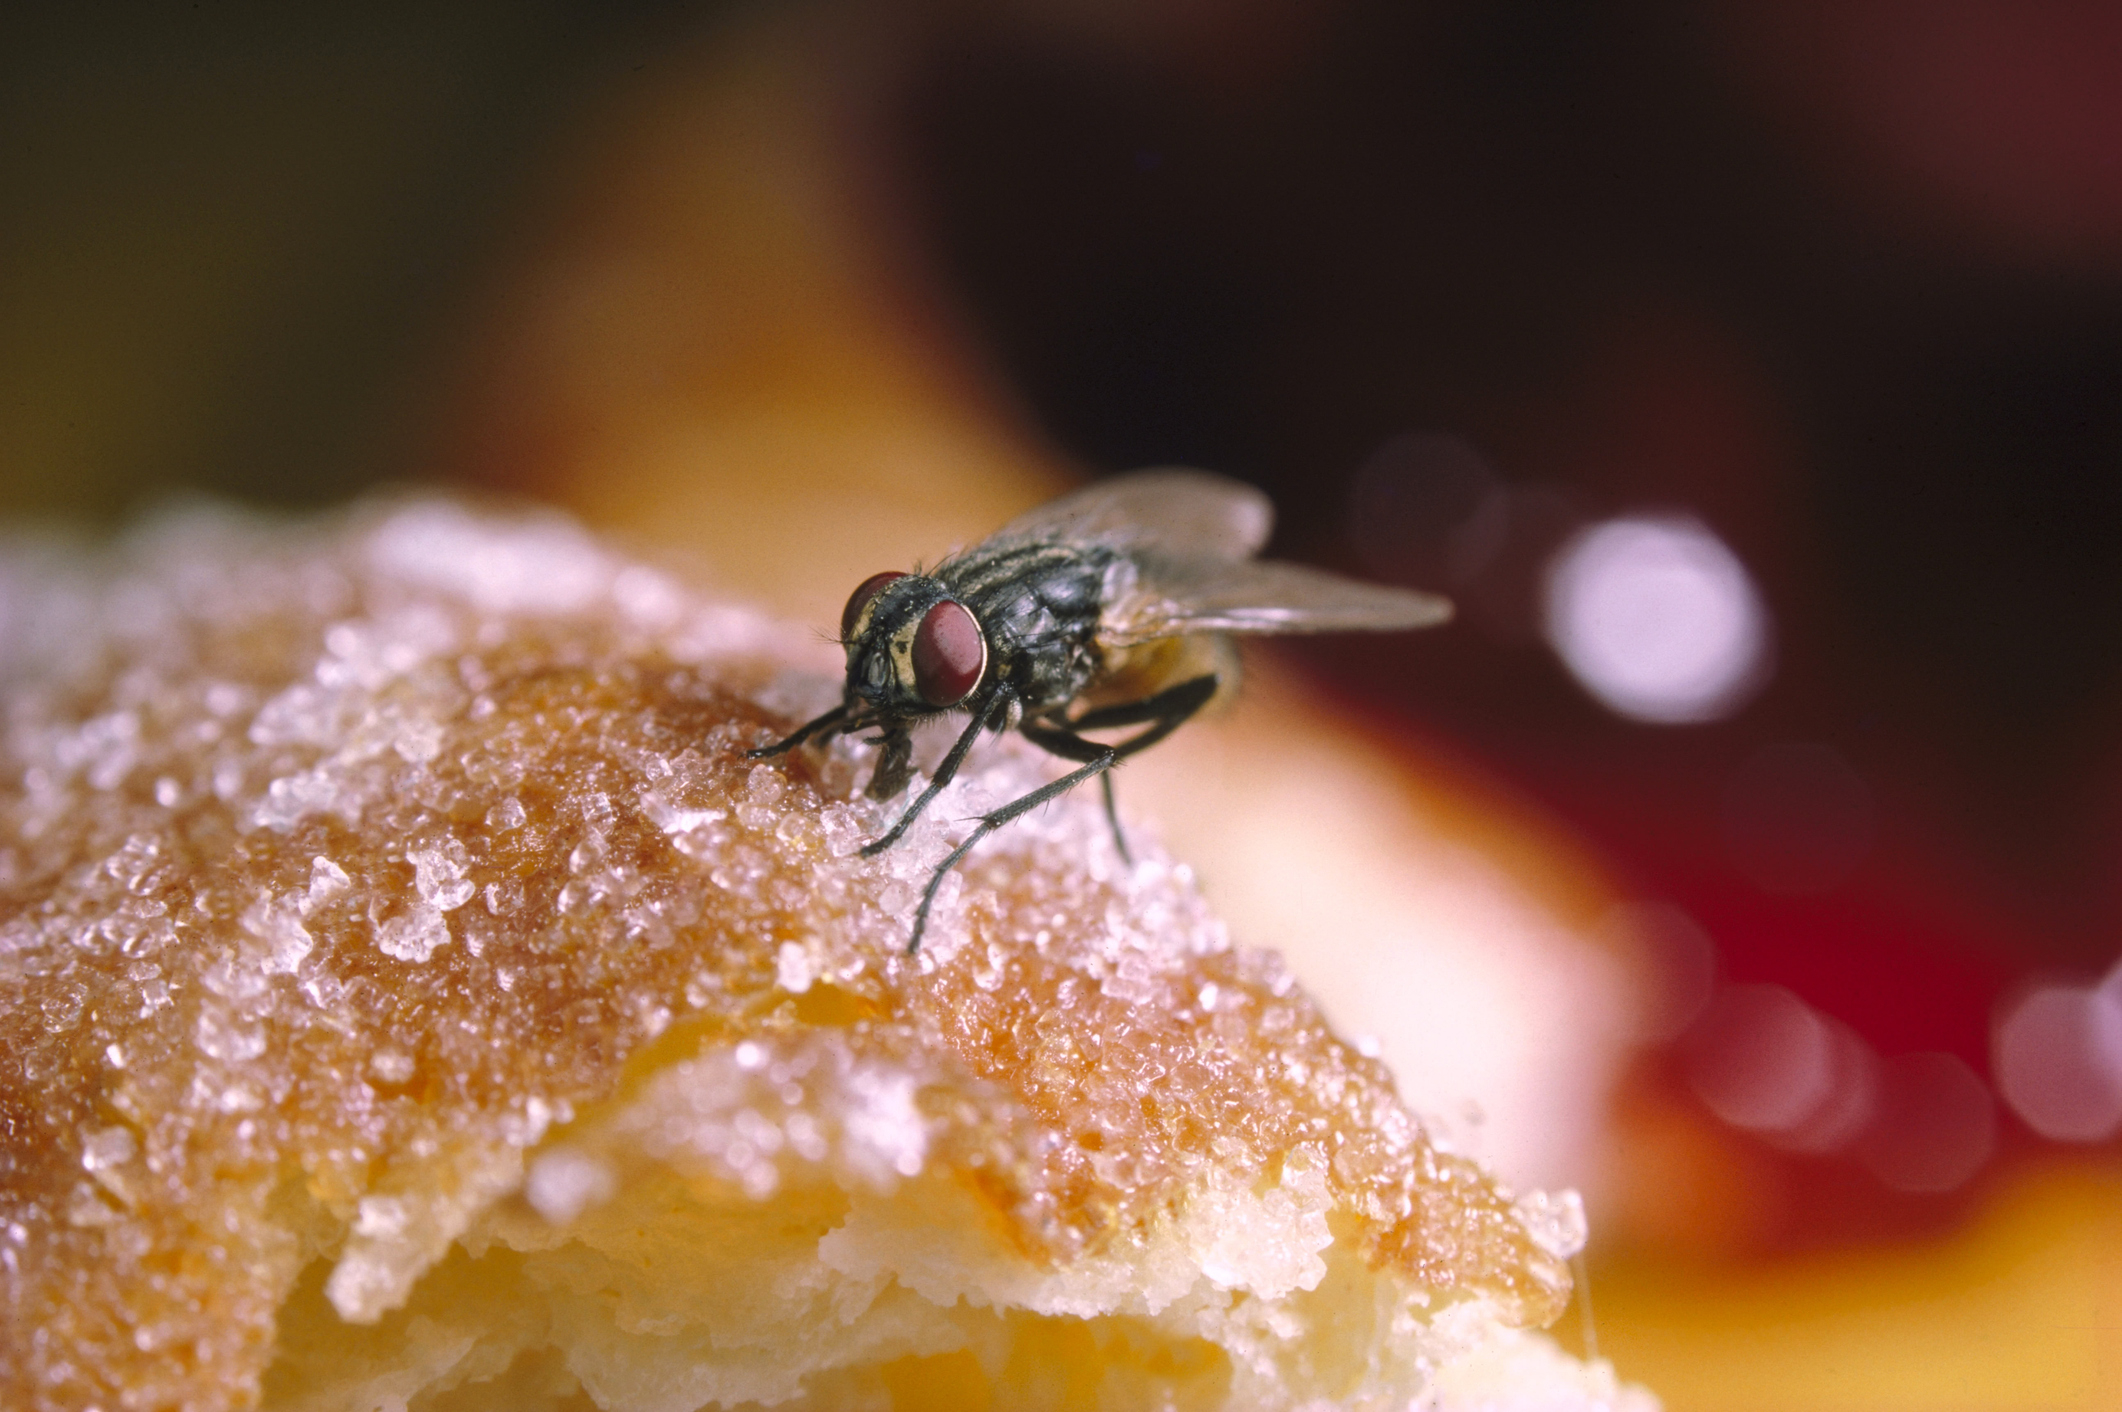 Close-up of a fly on a pastry